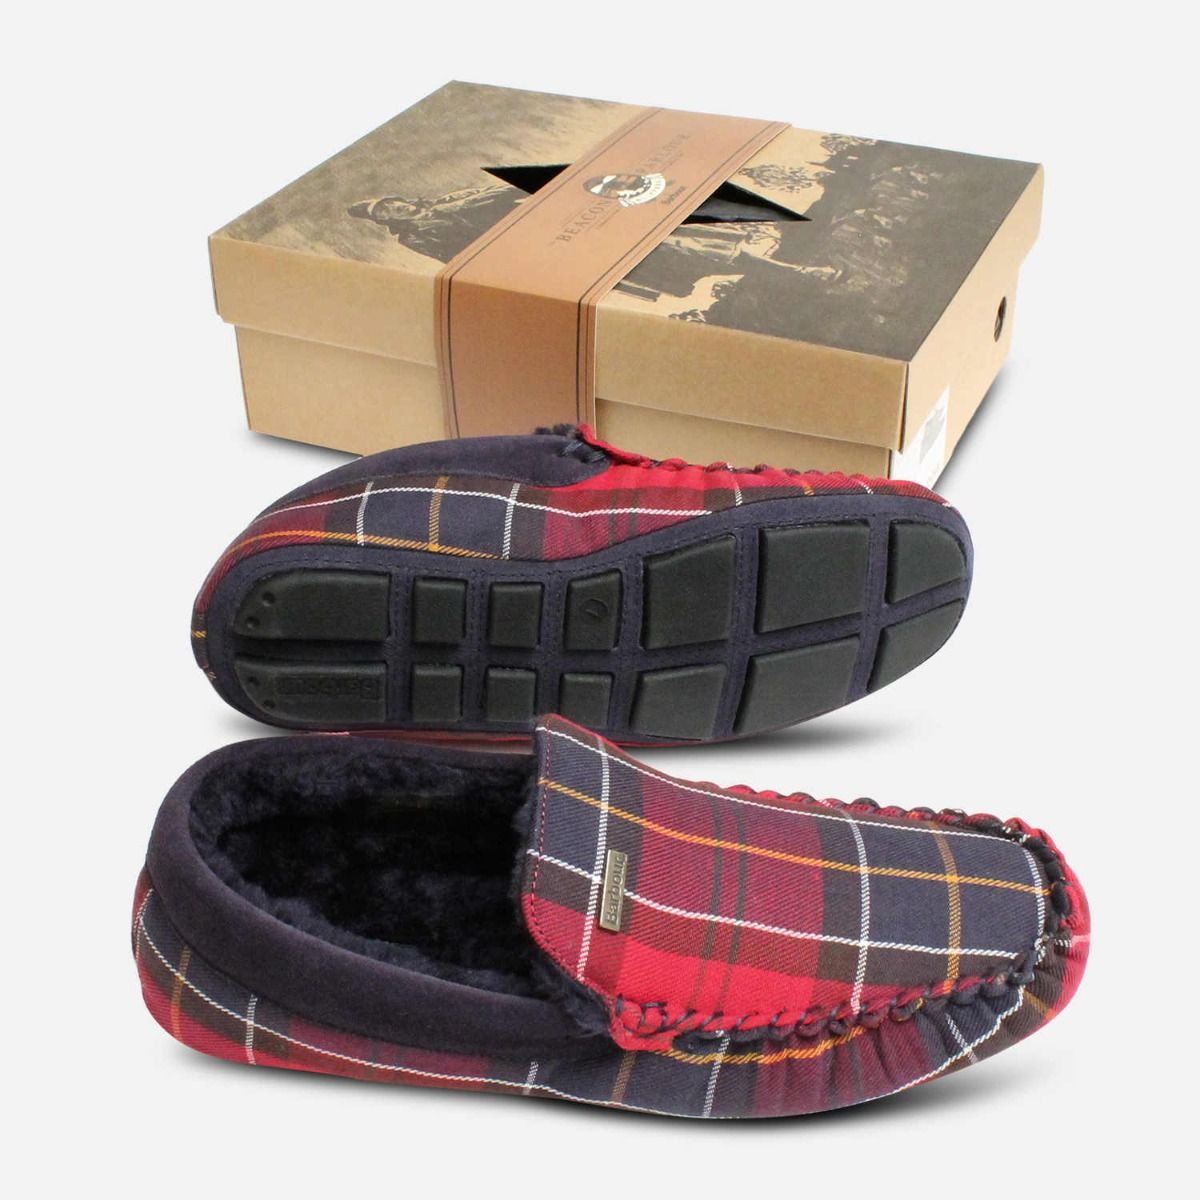 barbour mens monty slippers